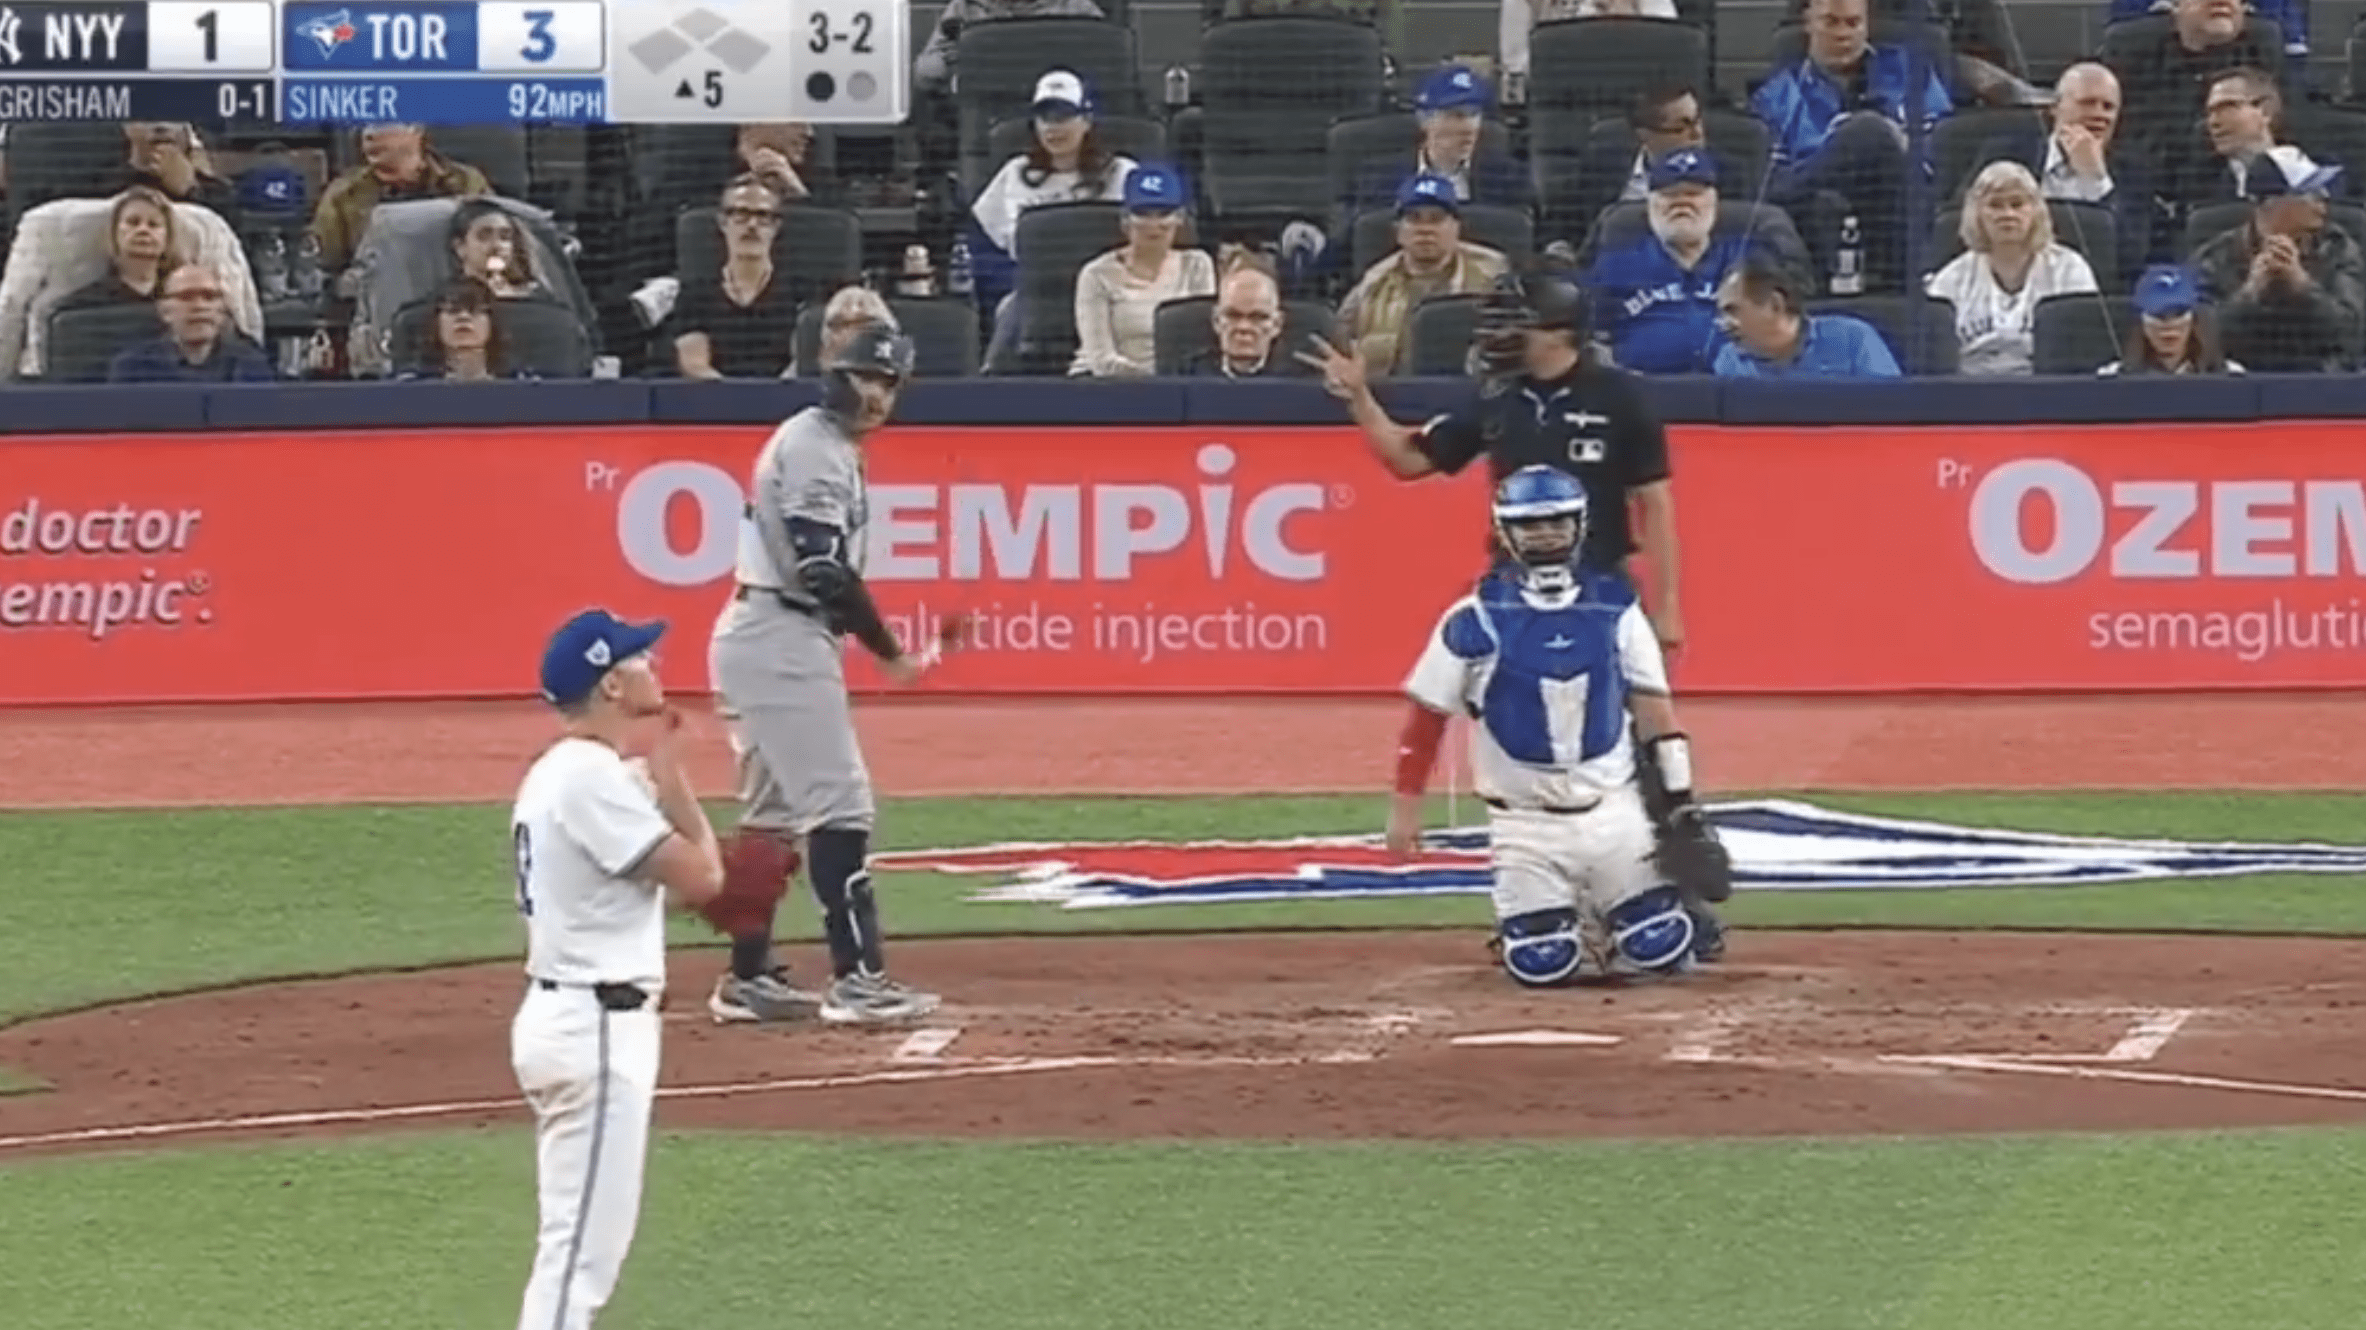 Ump in Yankees-Blue Jays Game Called Batter Out After Two Strikes, Then Casually Fixed It